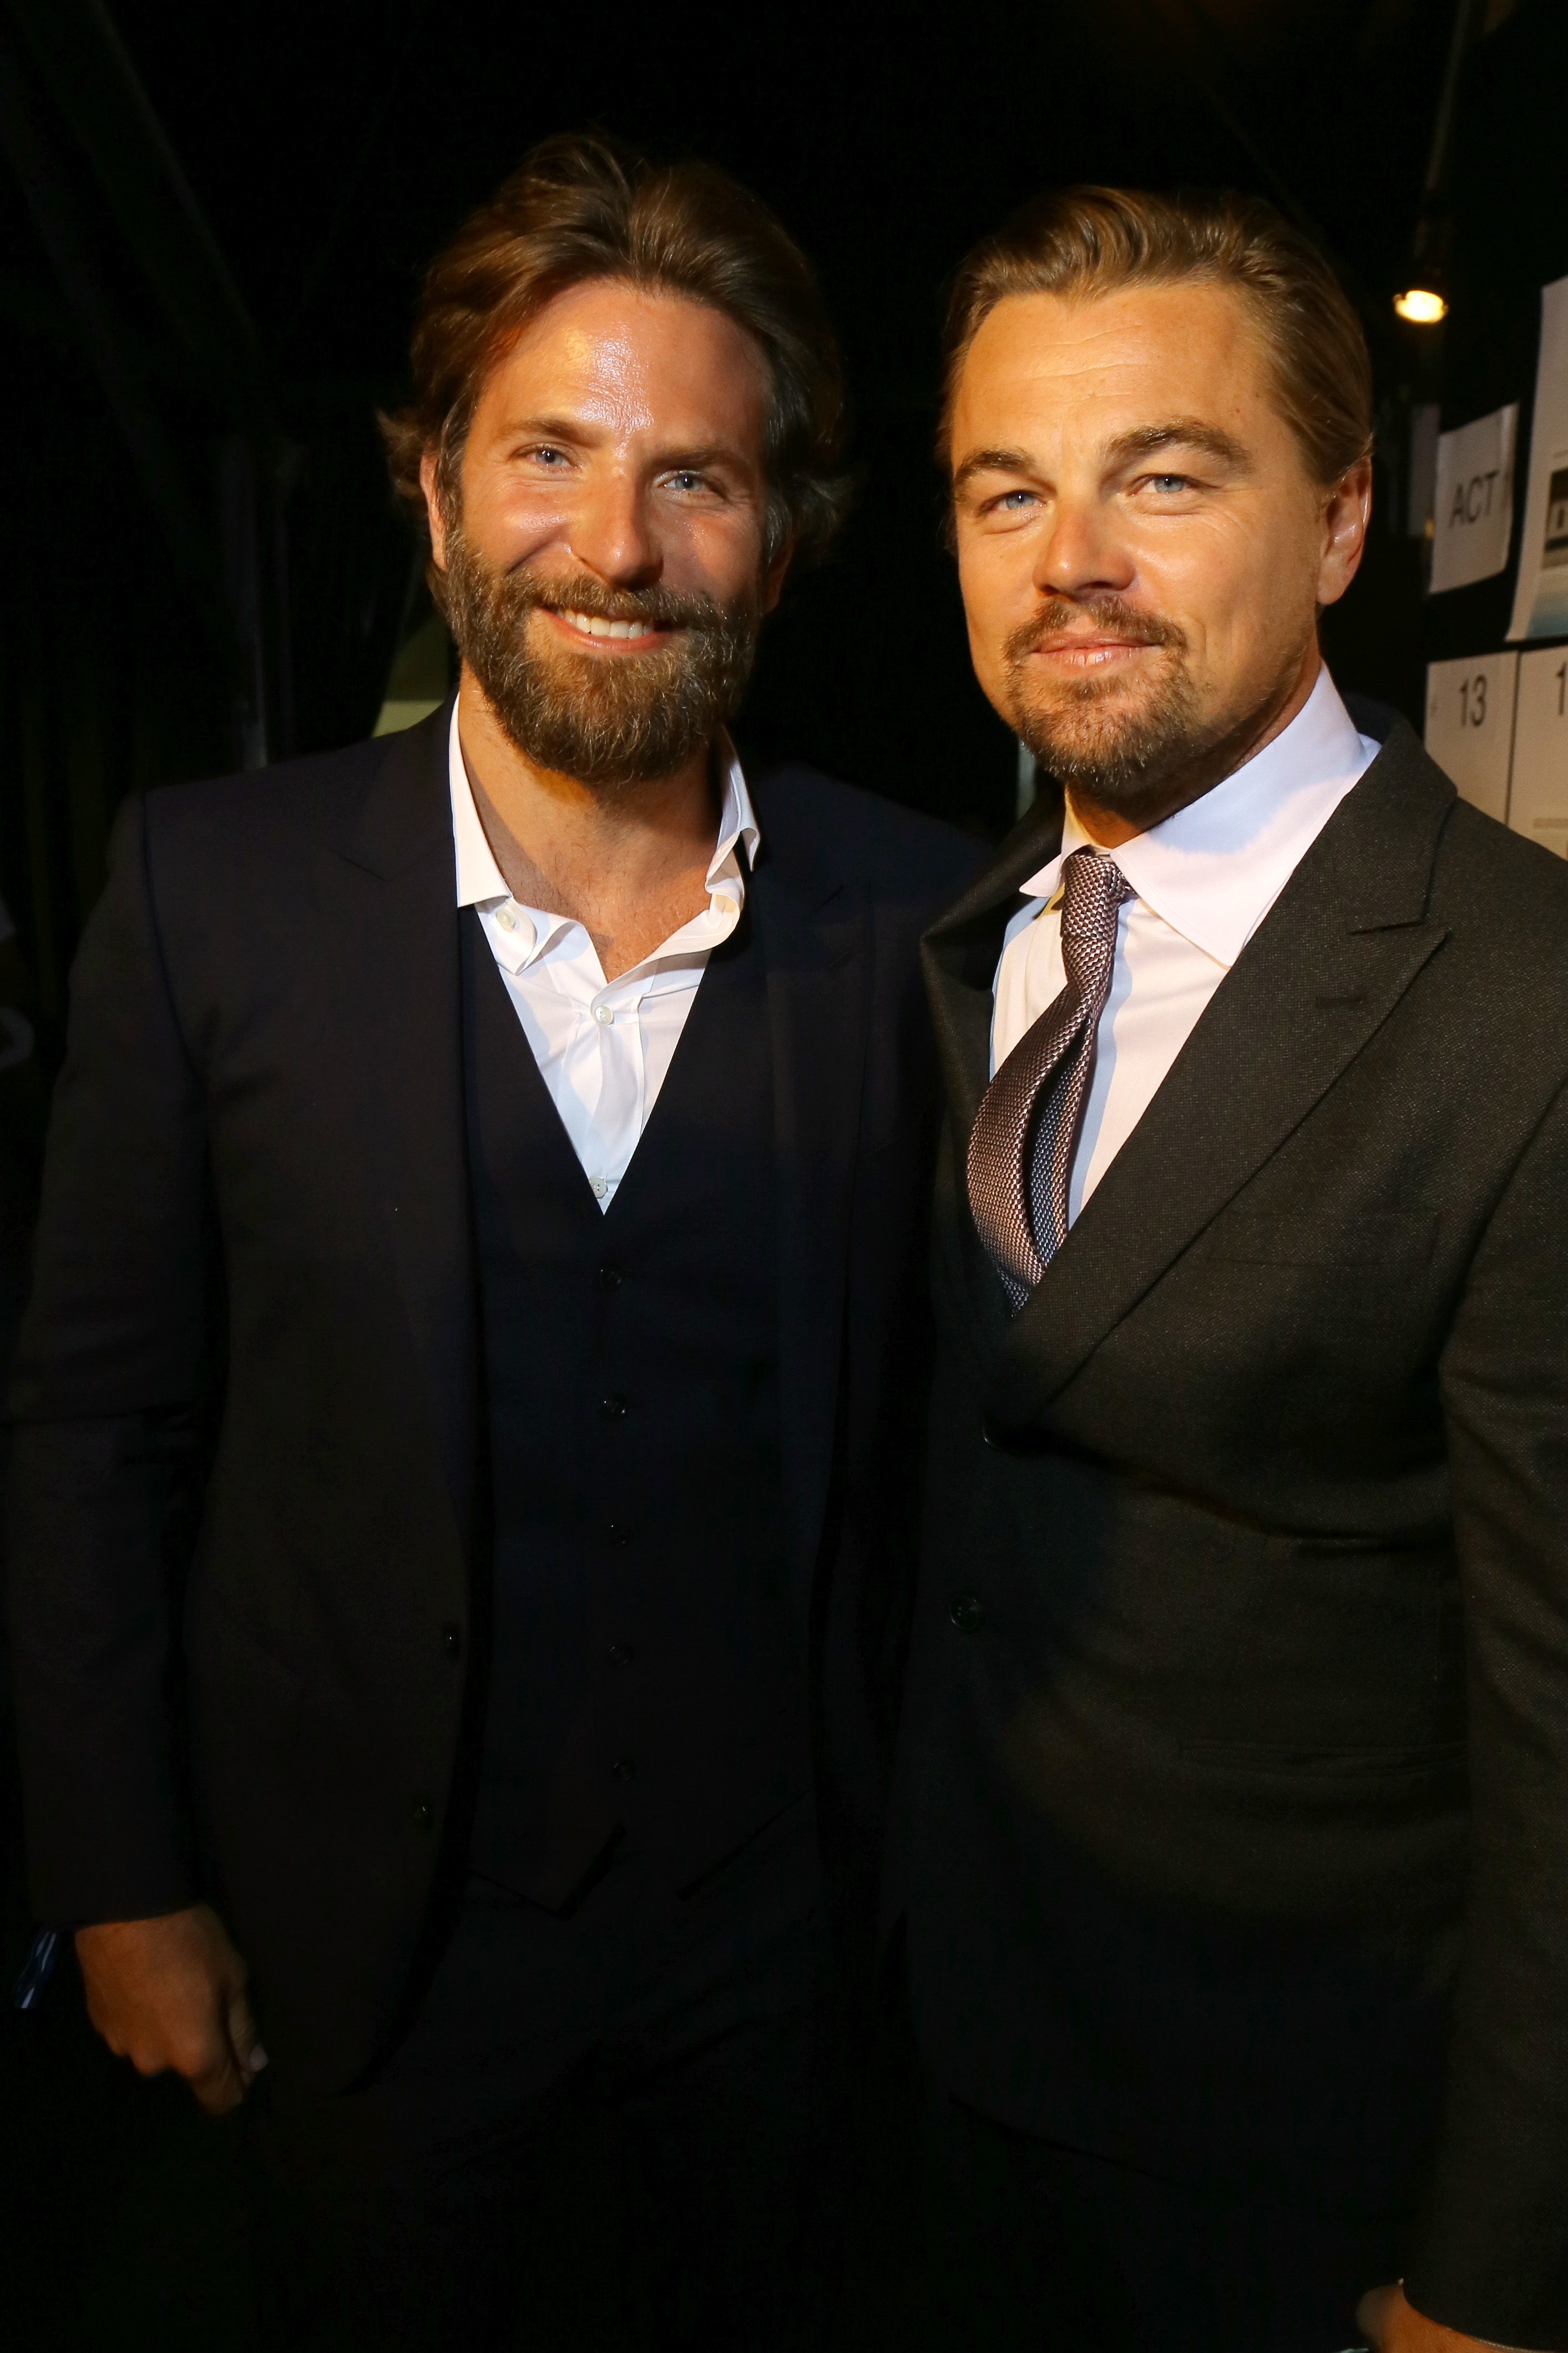 Bradley Cooper and Leonardo DiCaprio at The Leonardo DiCaprio Foundation 3rd Annual Saint-Tropez Gala in Saint-Tropez, France on July 20, 2016 | Source: Getty Images